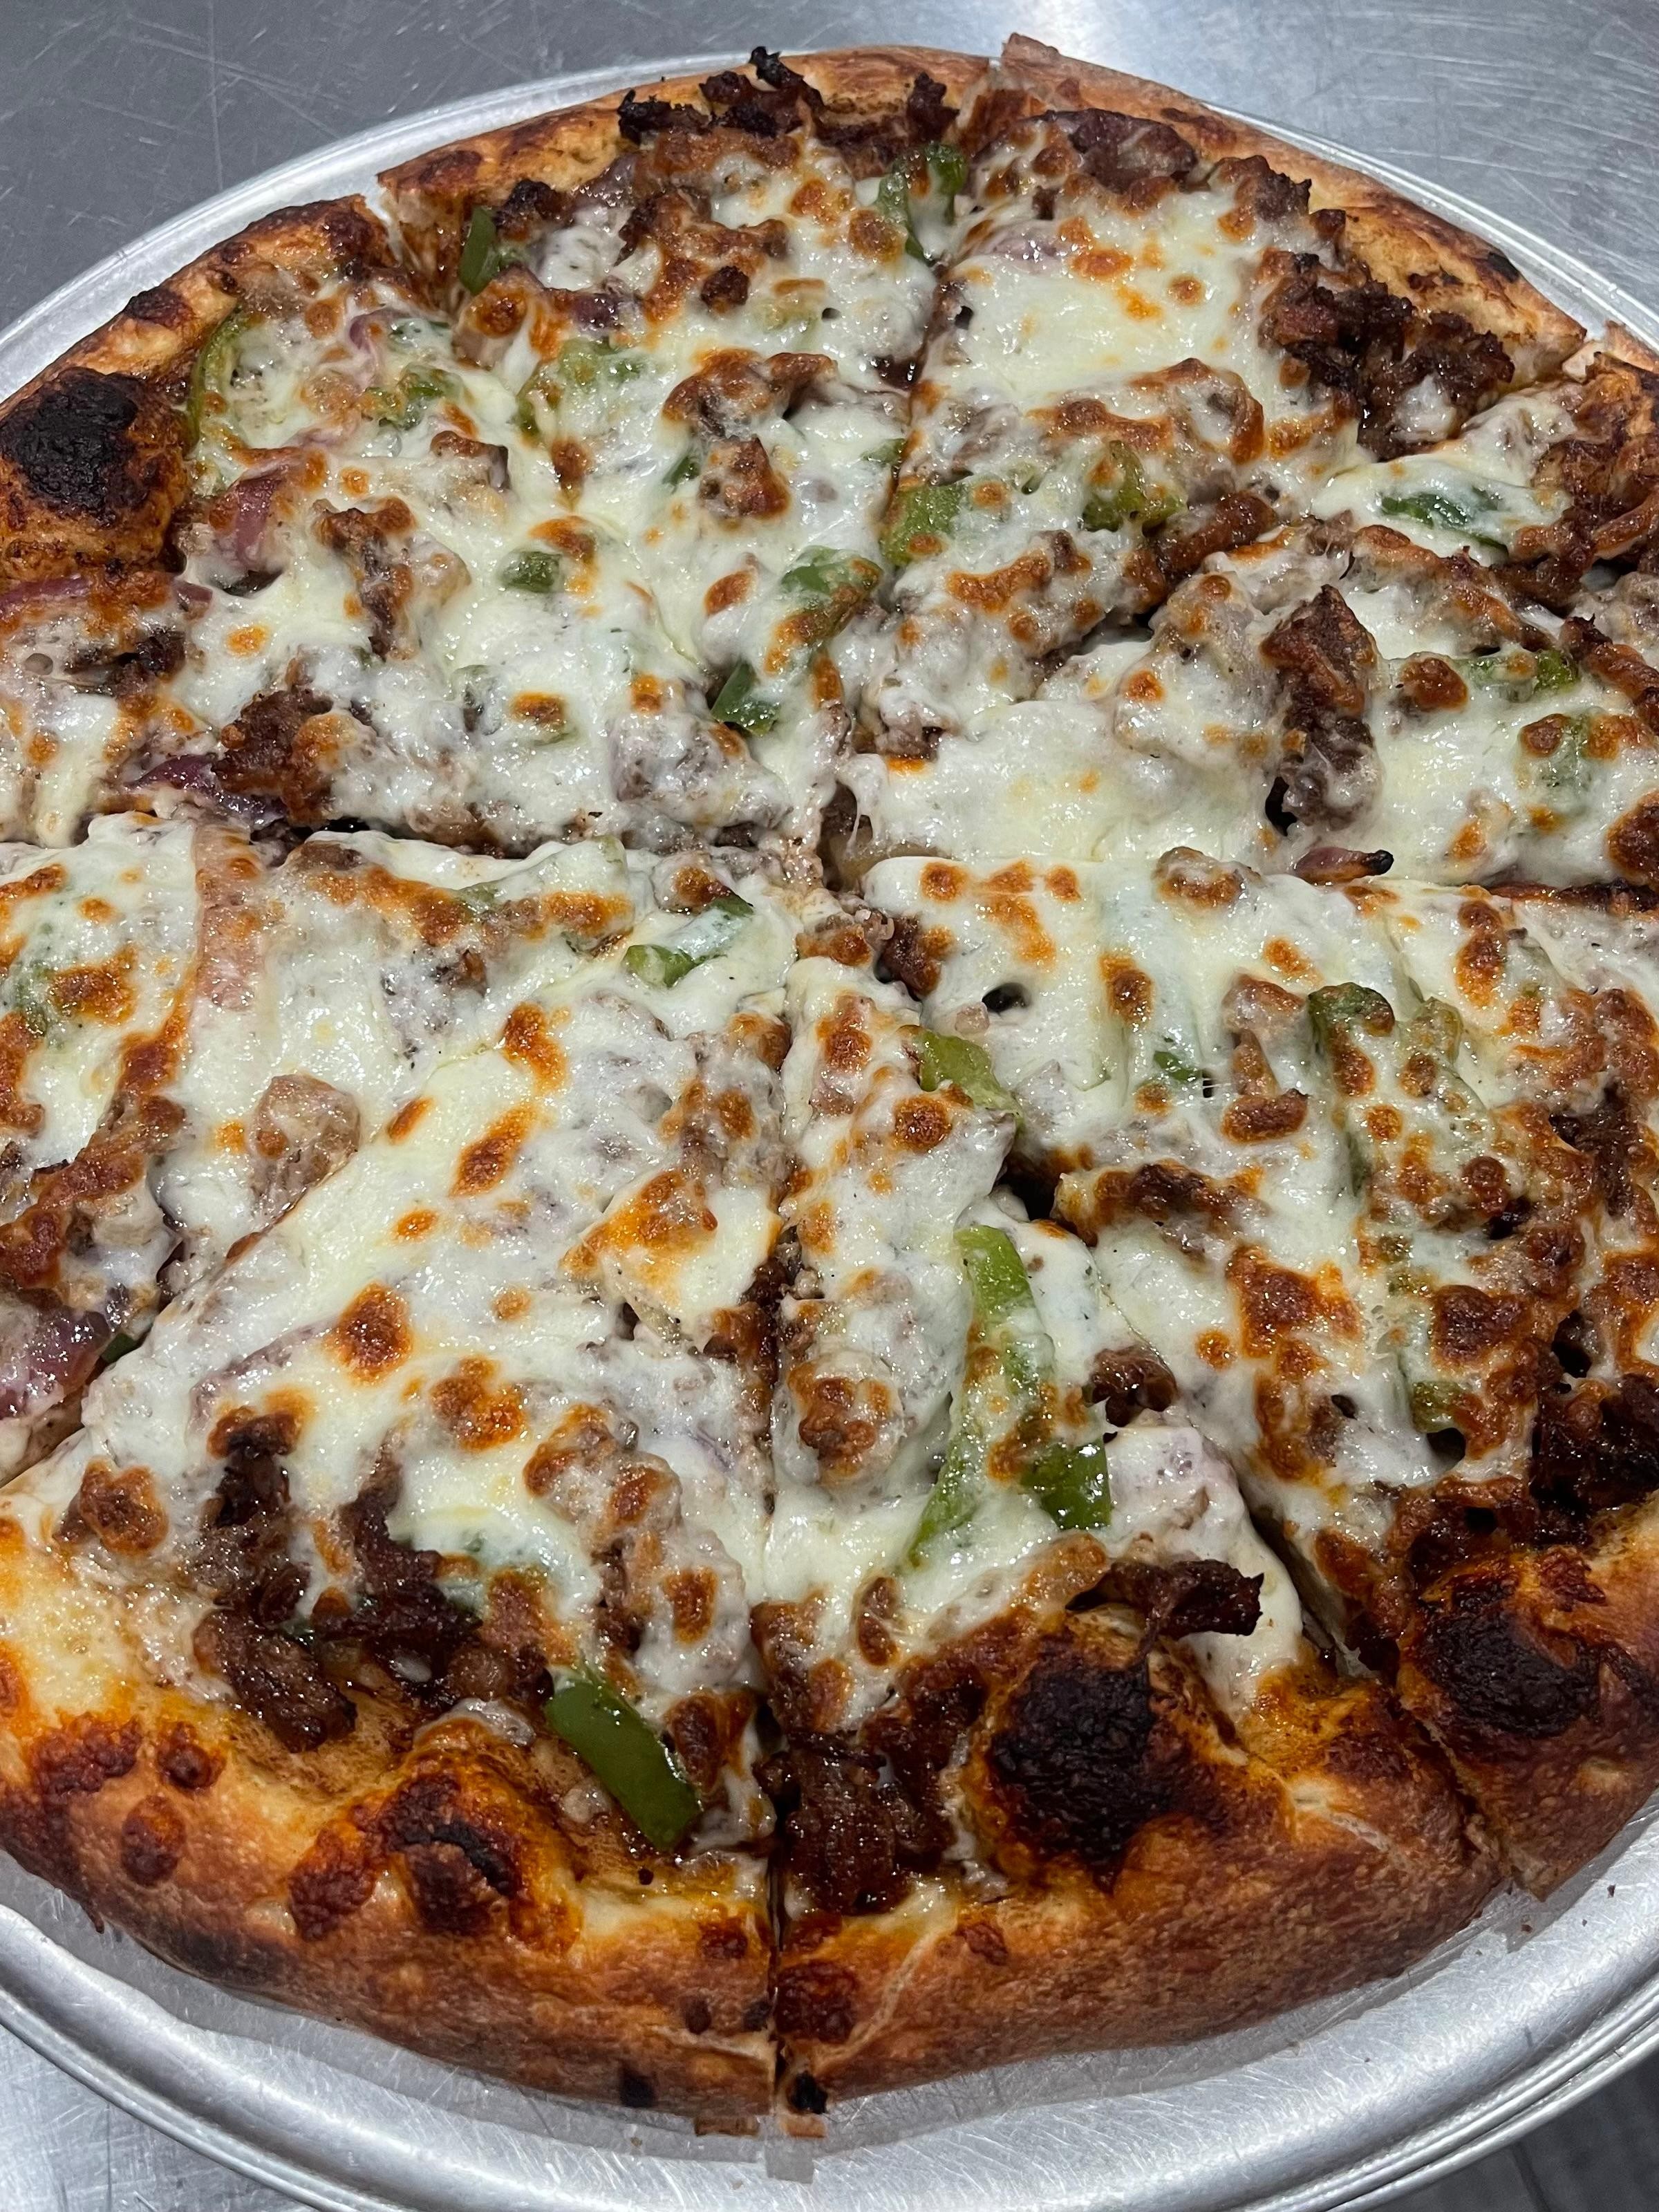 The Philly Steak & Cheese PIZZA